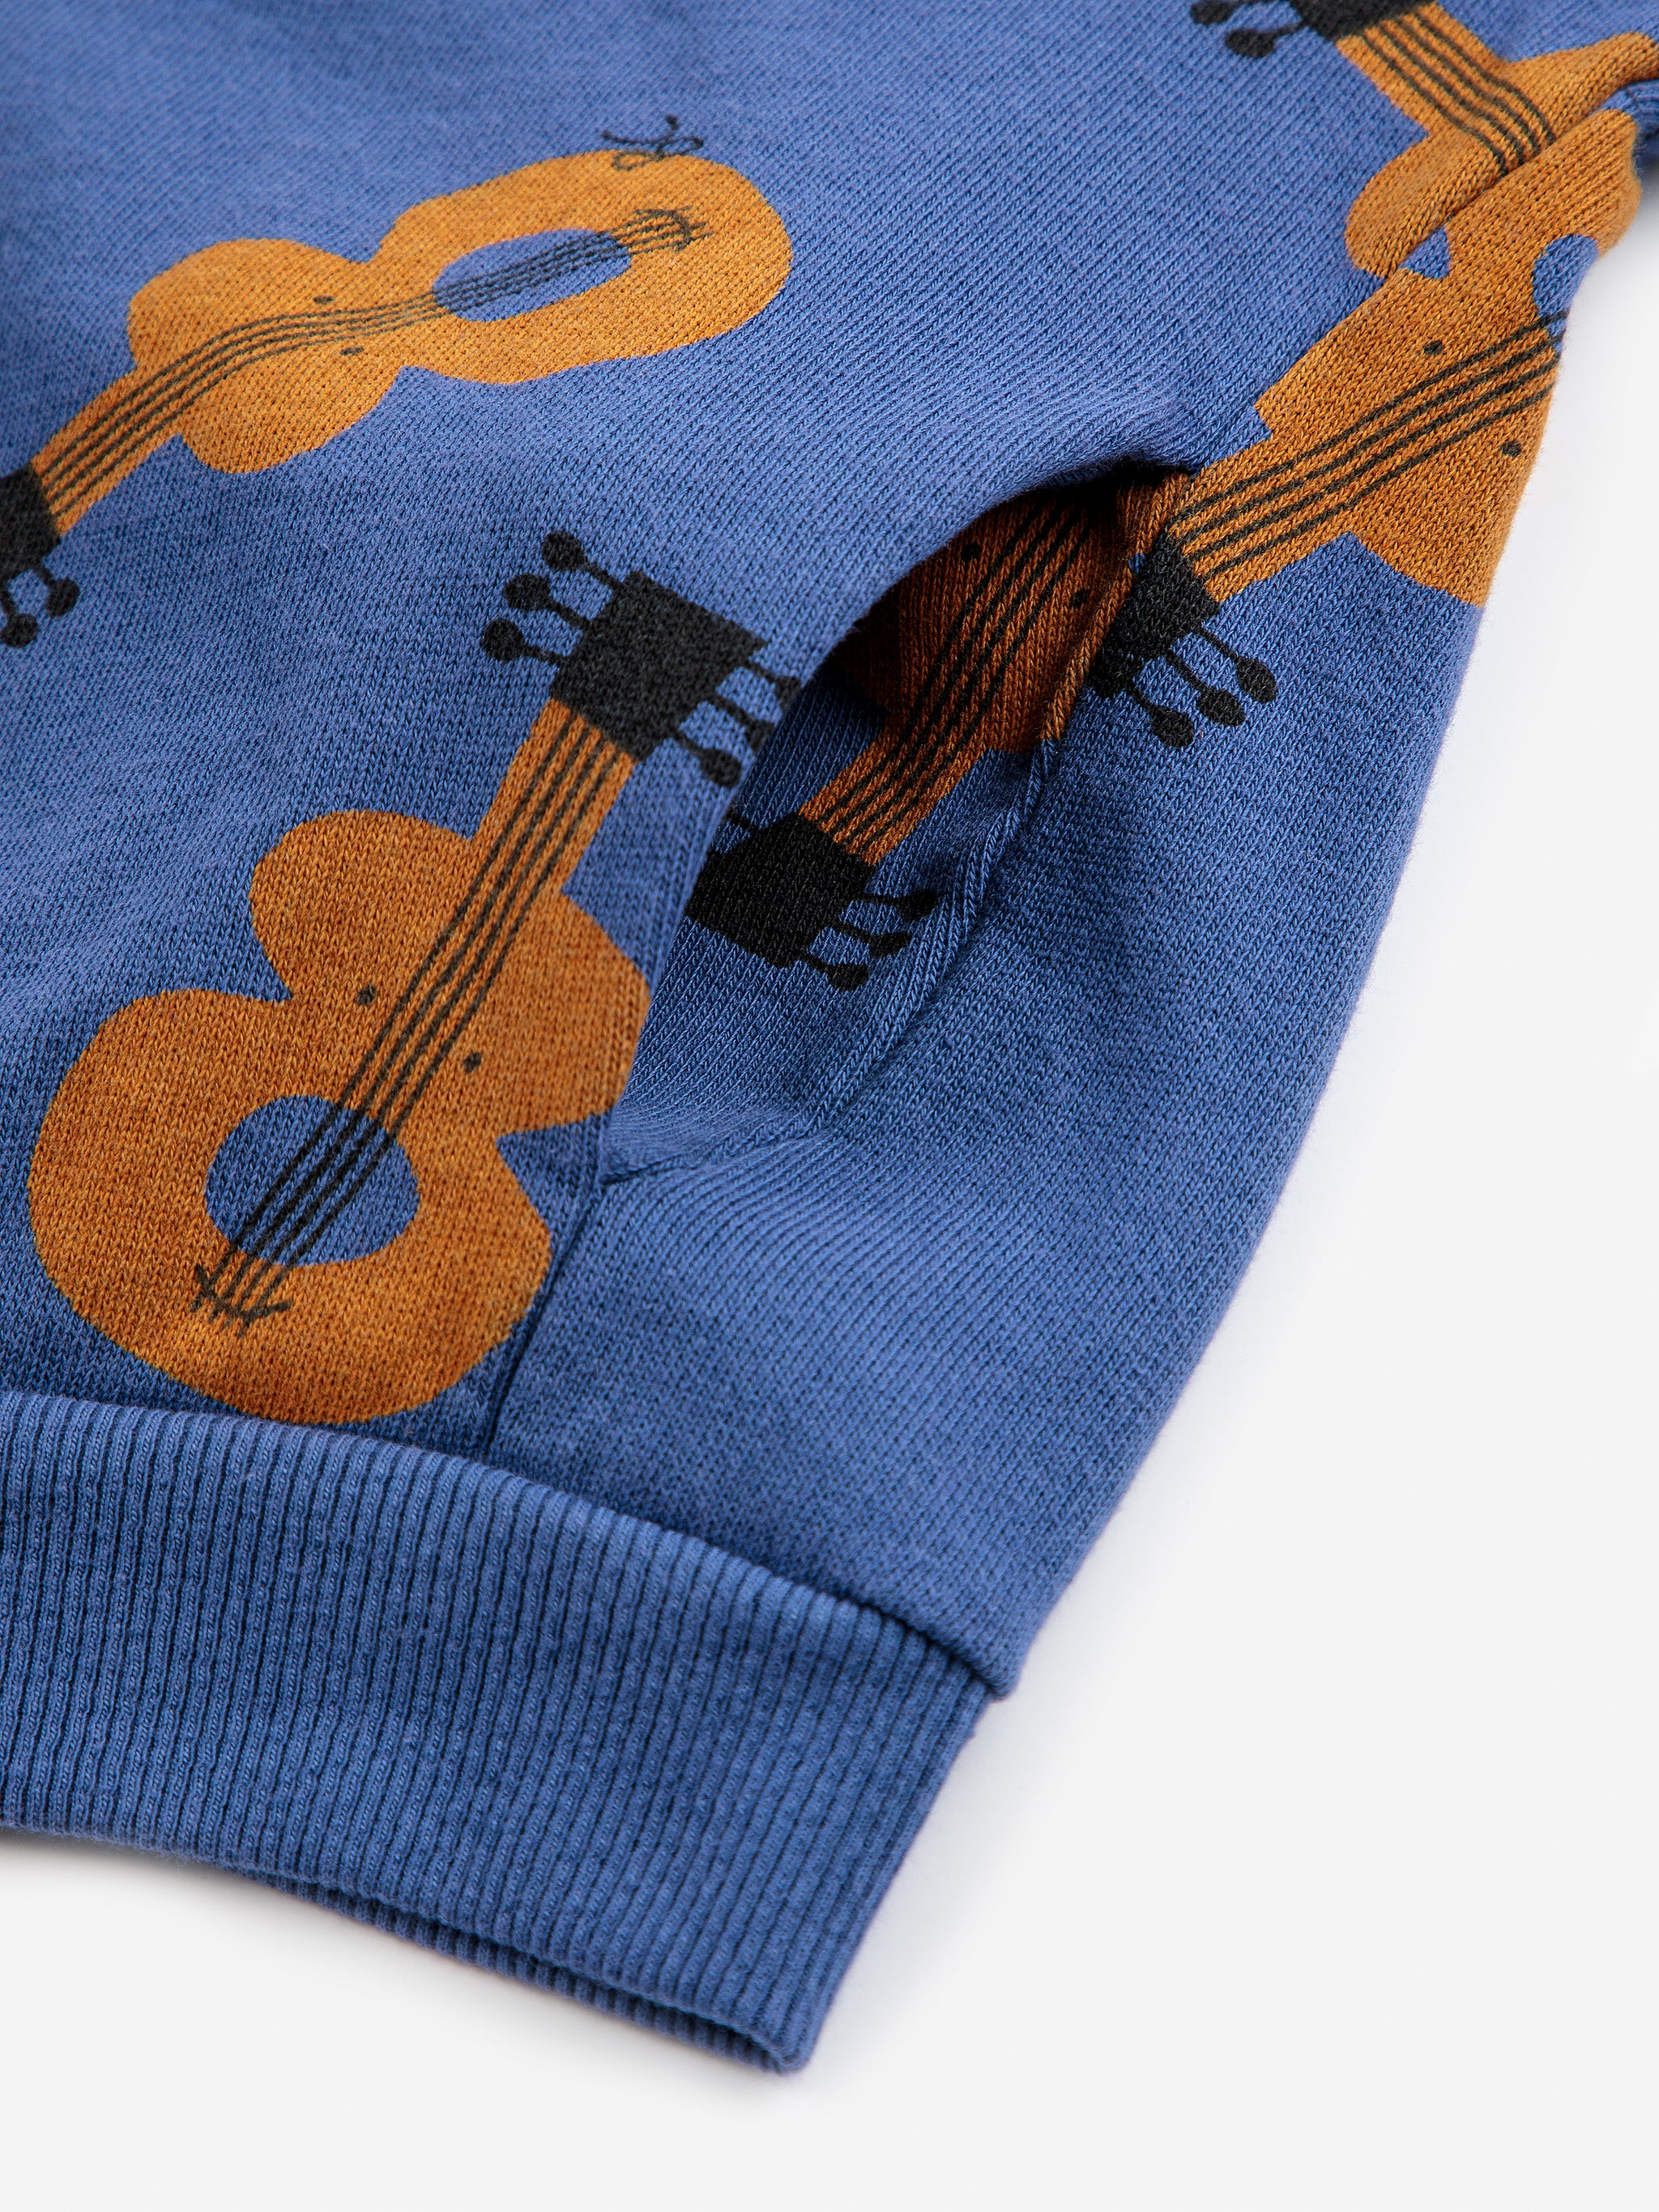 Bobo Choses Baby Acoustic Guitar All Over Zipped Hoodie - Navy Blue